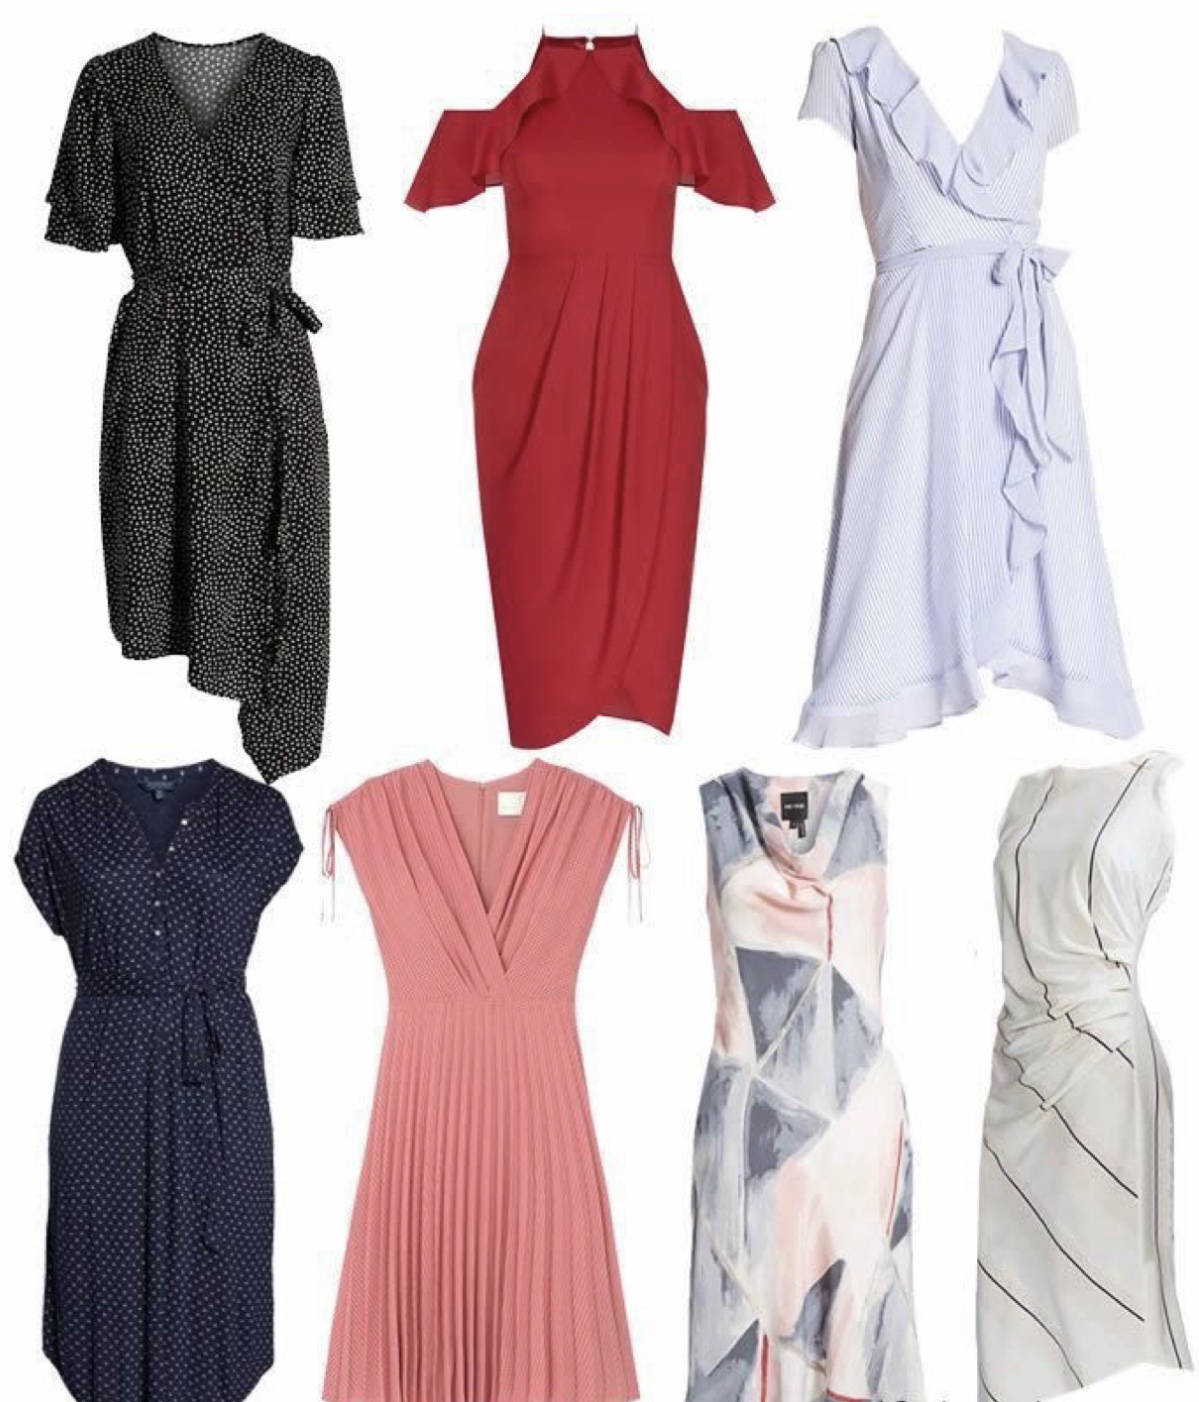 Slimming Dresses To Hide Belly